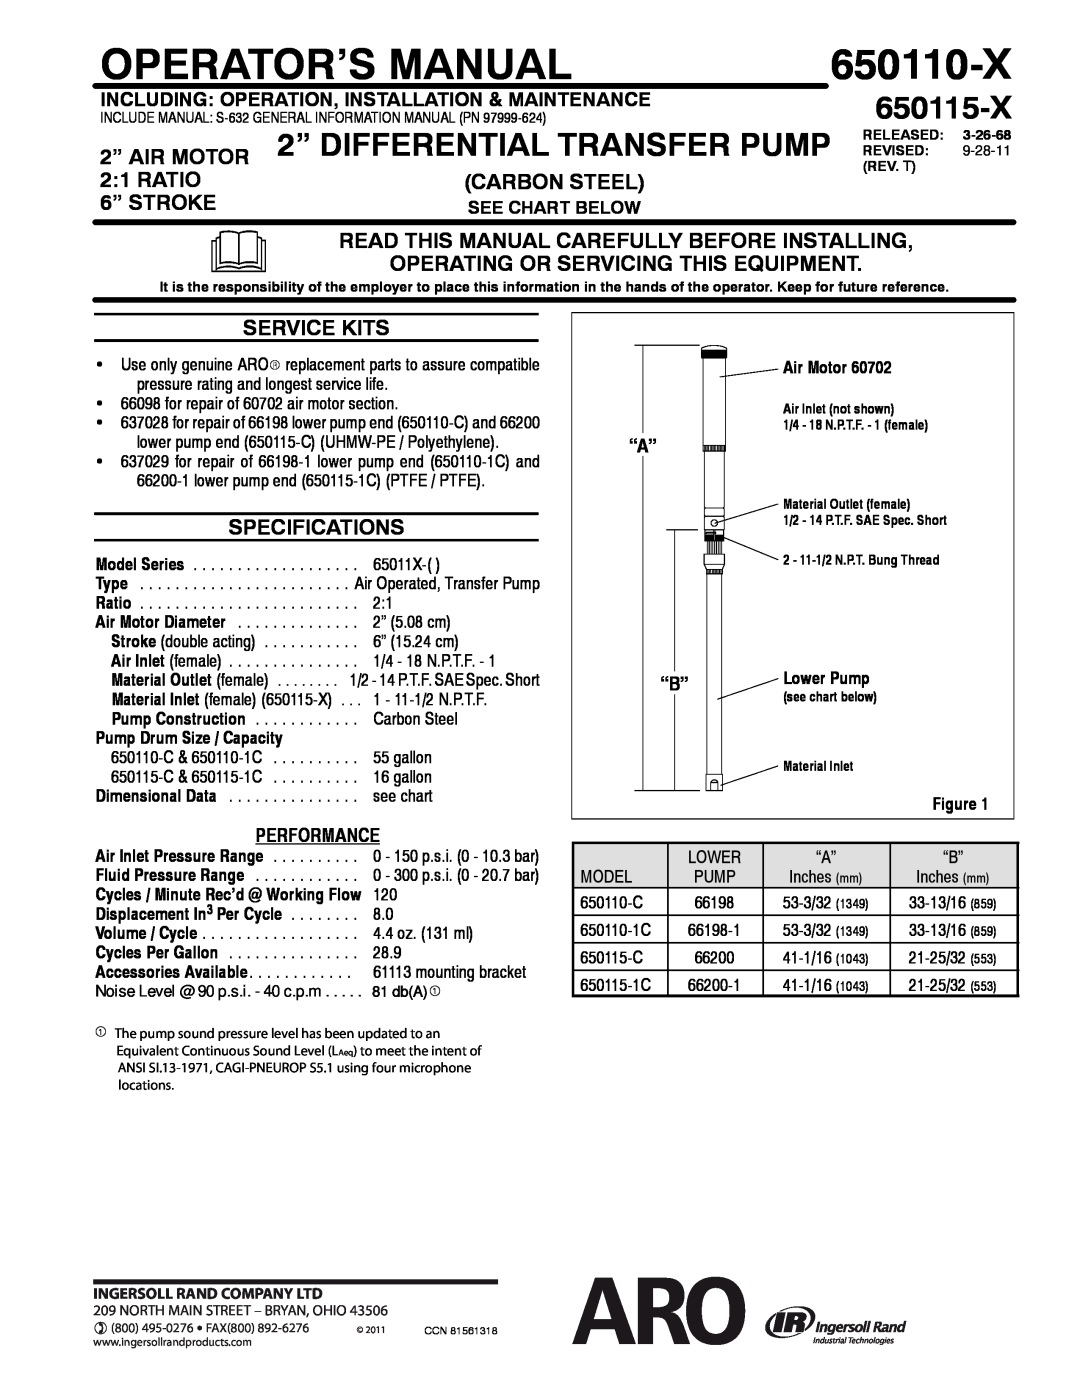 Ingersoll-Rand 650110-X specifications 2” AIR MOTOR, 2 1 RATIO, 6” STROKE, Read This Manual Carefully Before Installing 